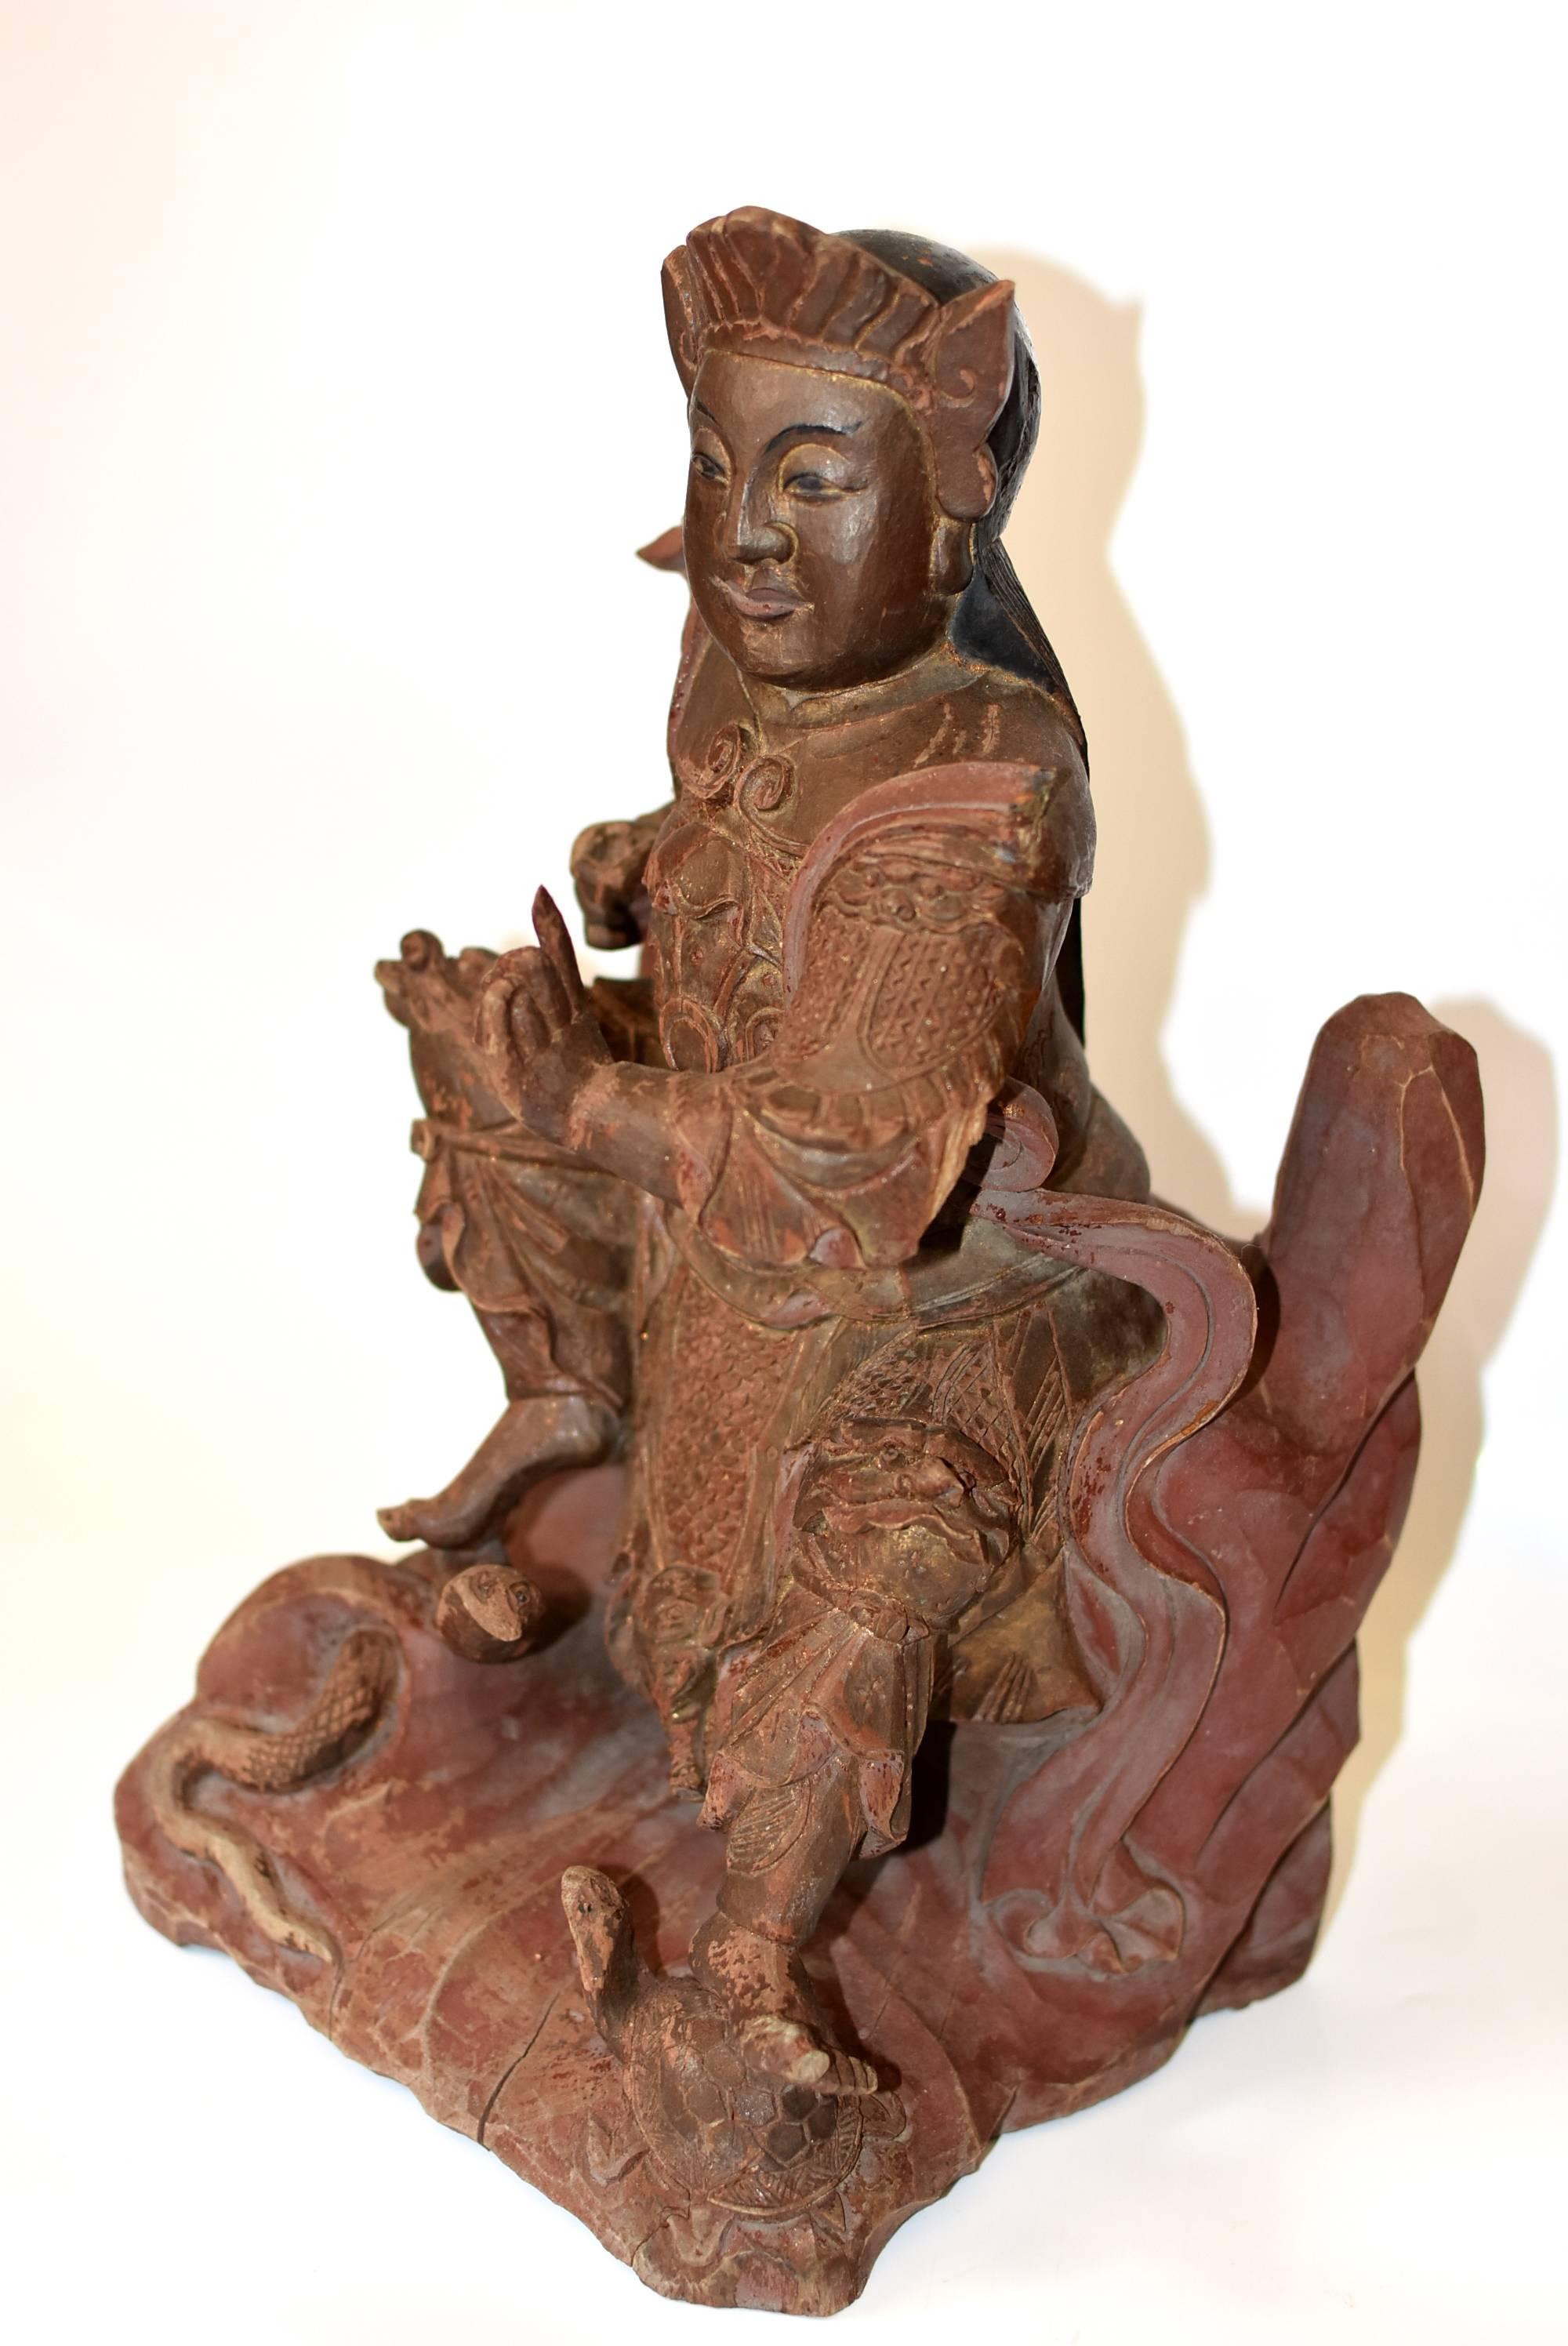 Large, 19th century wooden statue depicts the 